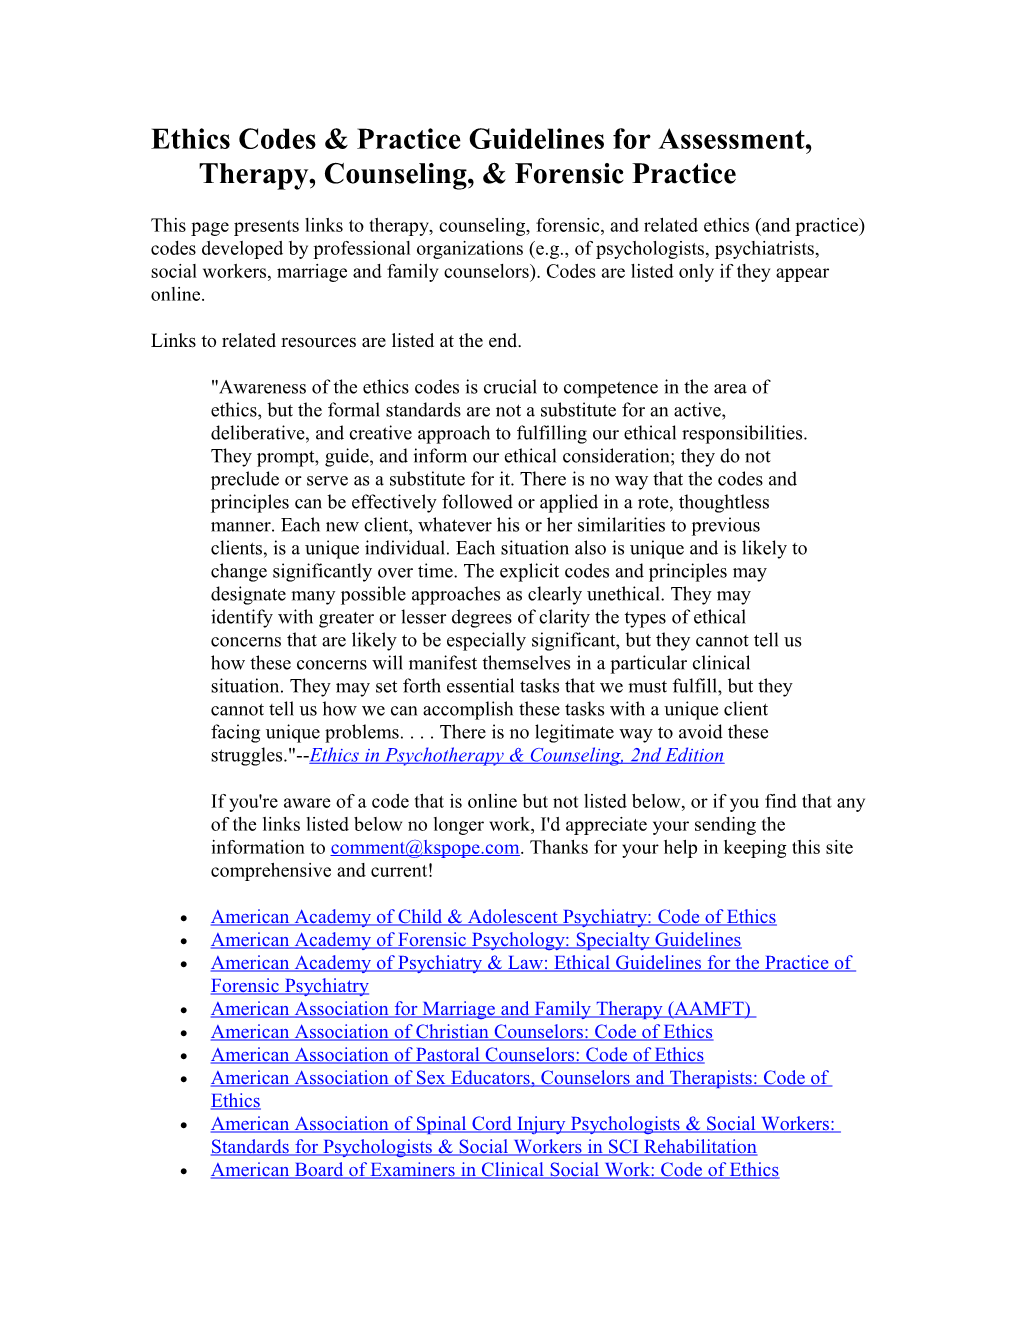 Ethics Codes & Practice Guidelines for Assessment, Therapy, Counseling, & Forensic Practice